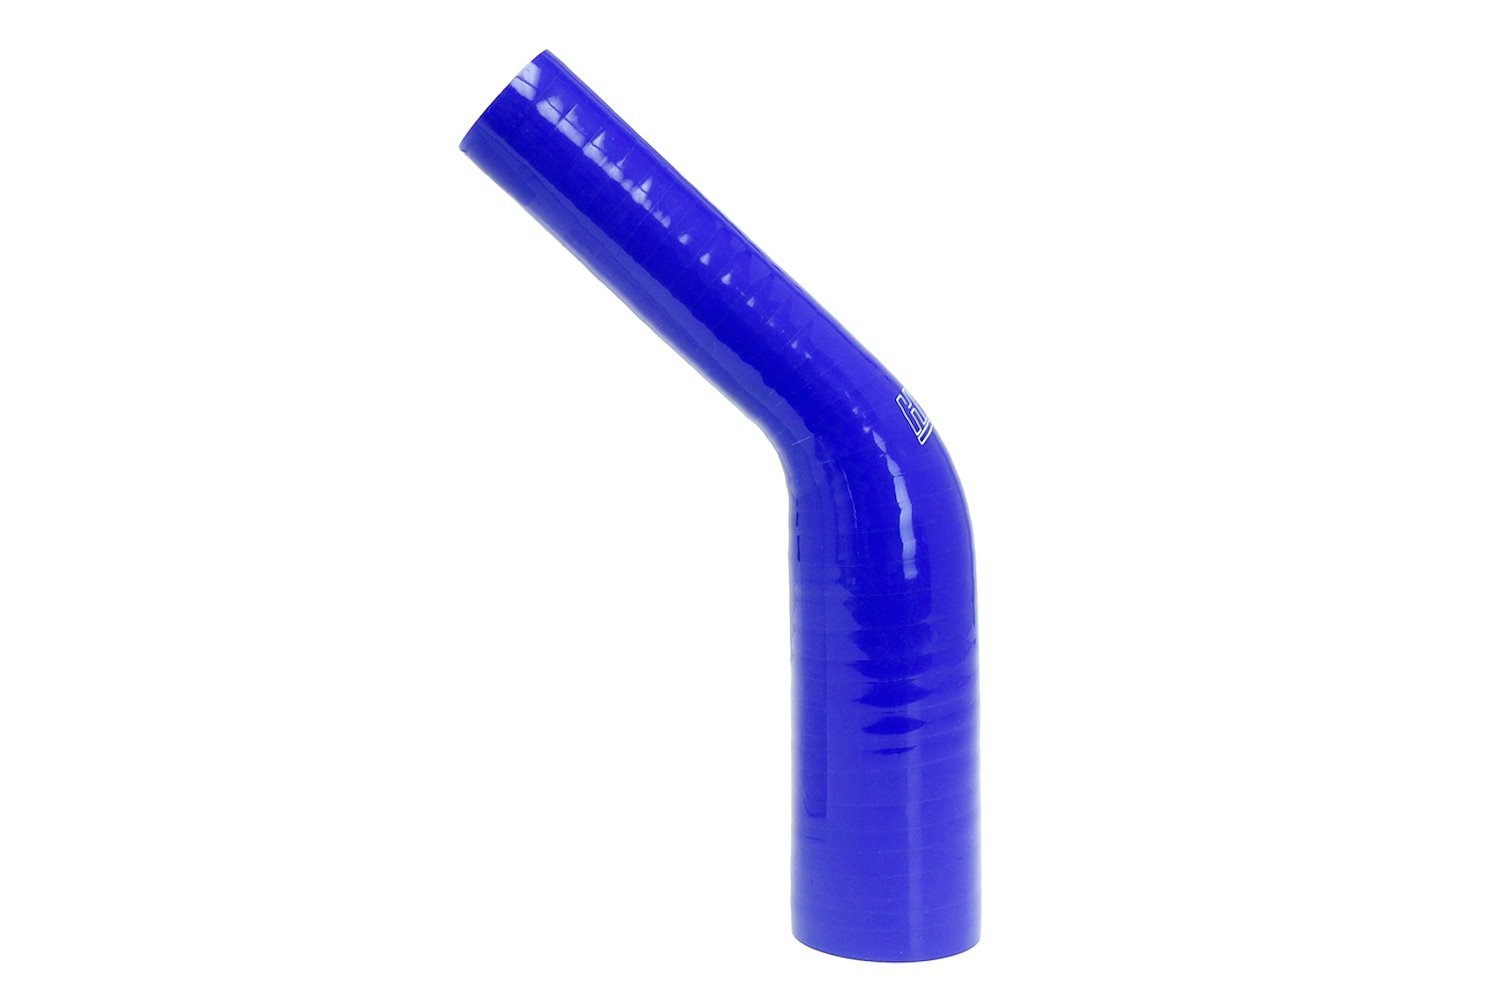 HTSER45-050-075-BLUE Silicone 45-Degree Elbow Hose, High-Temp 4-Ply Reinforced, 1/2 in. - 3/4 in. ID, Blue